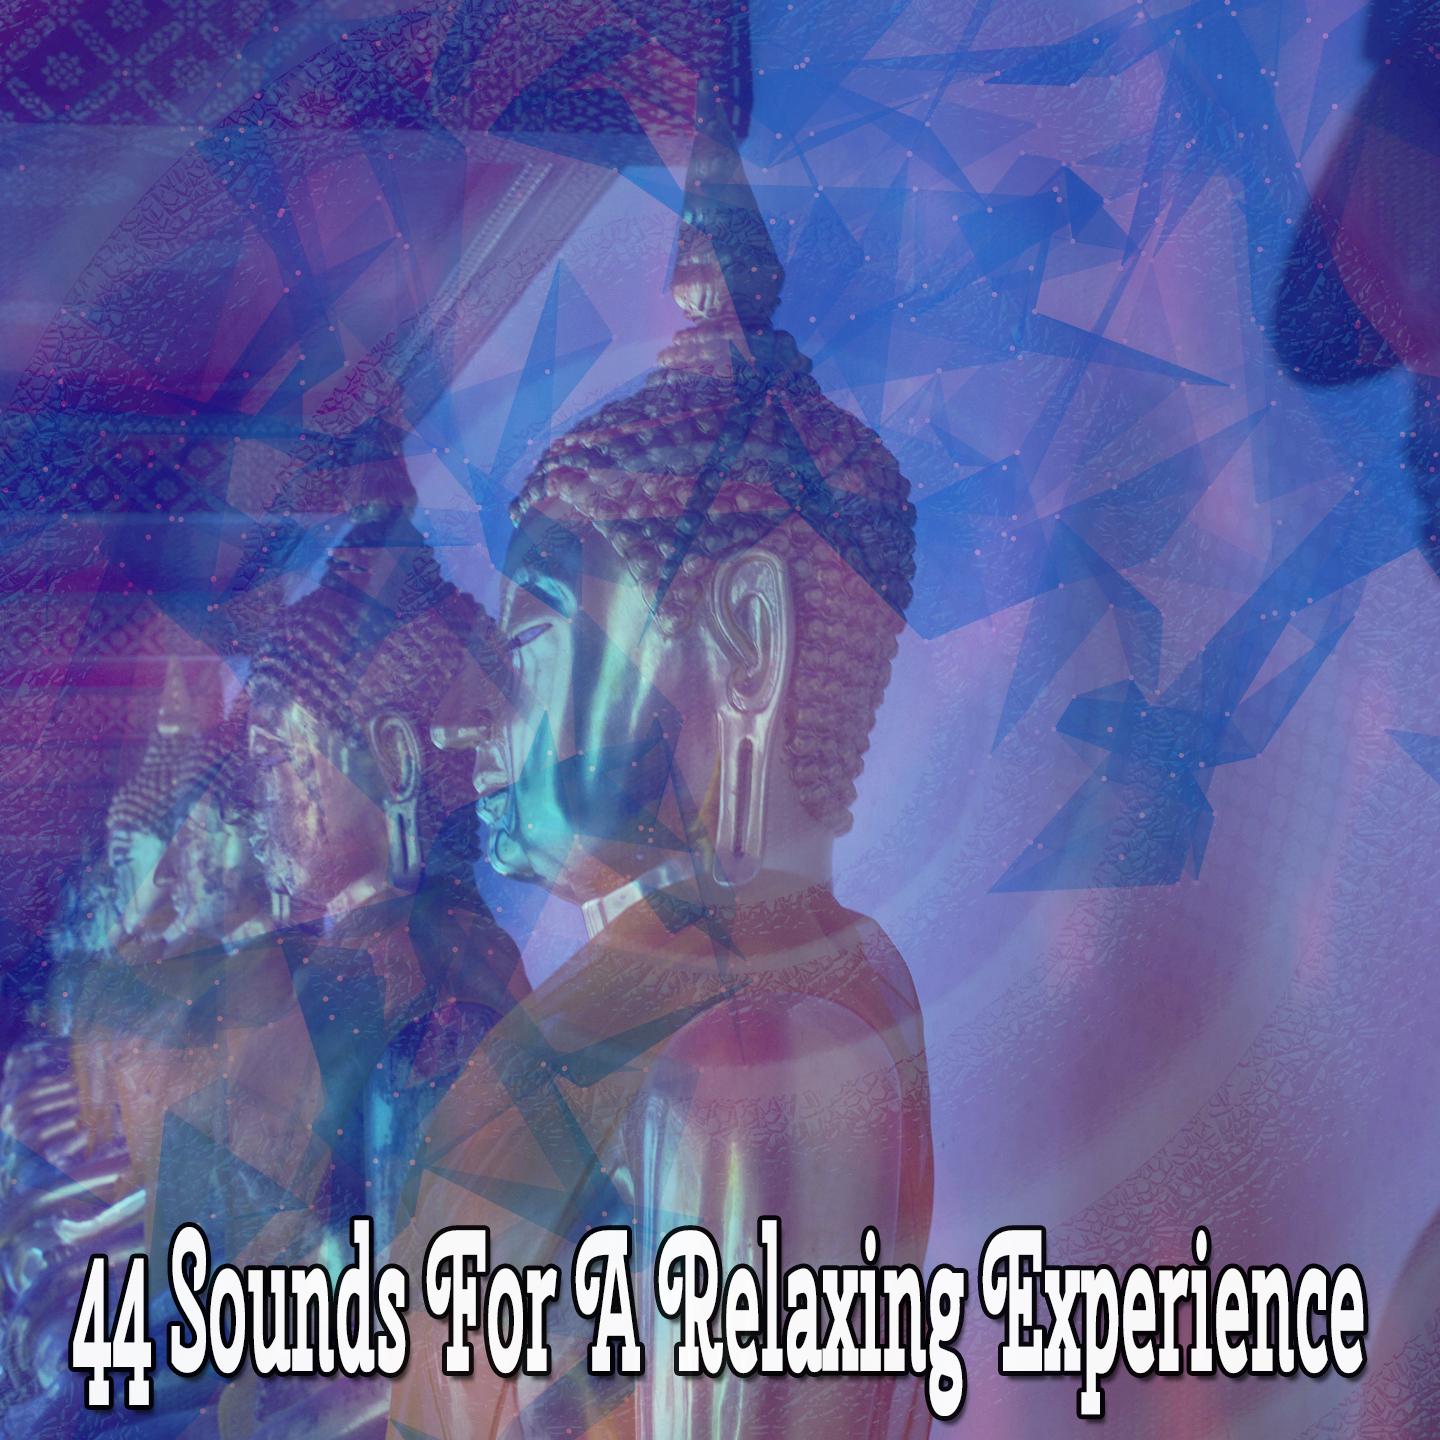 44 Sounds for a Relaxing Experience